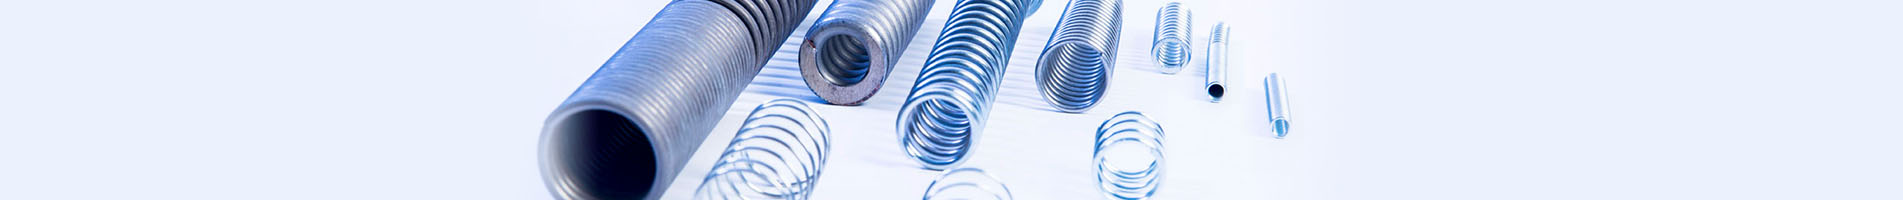 compression springs in banner image